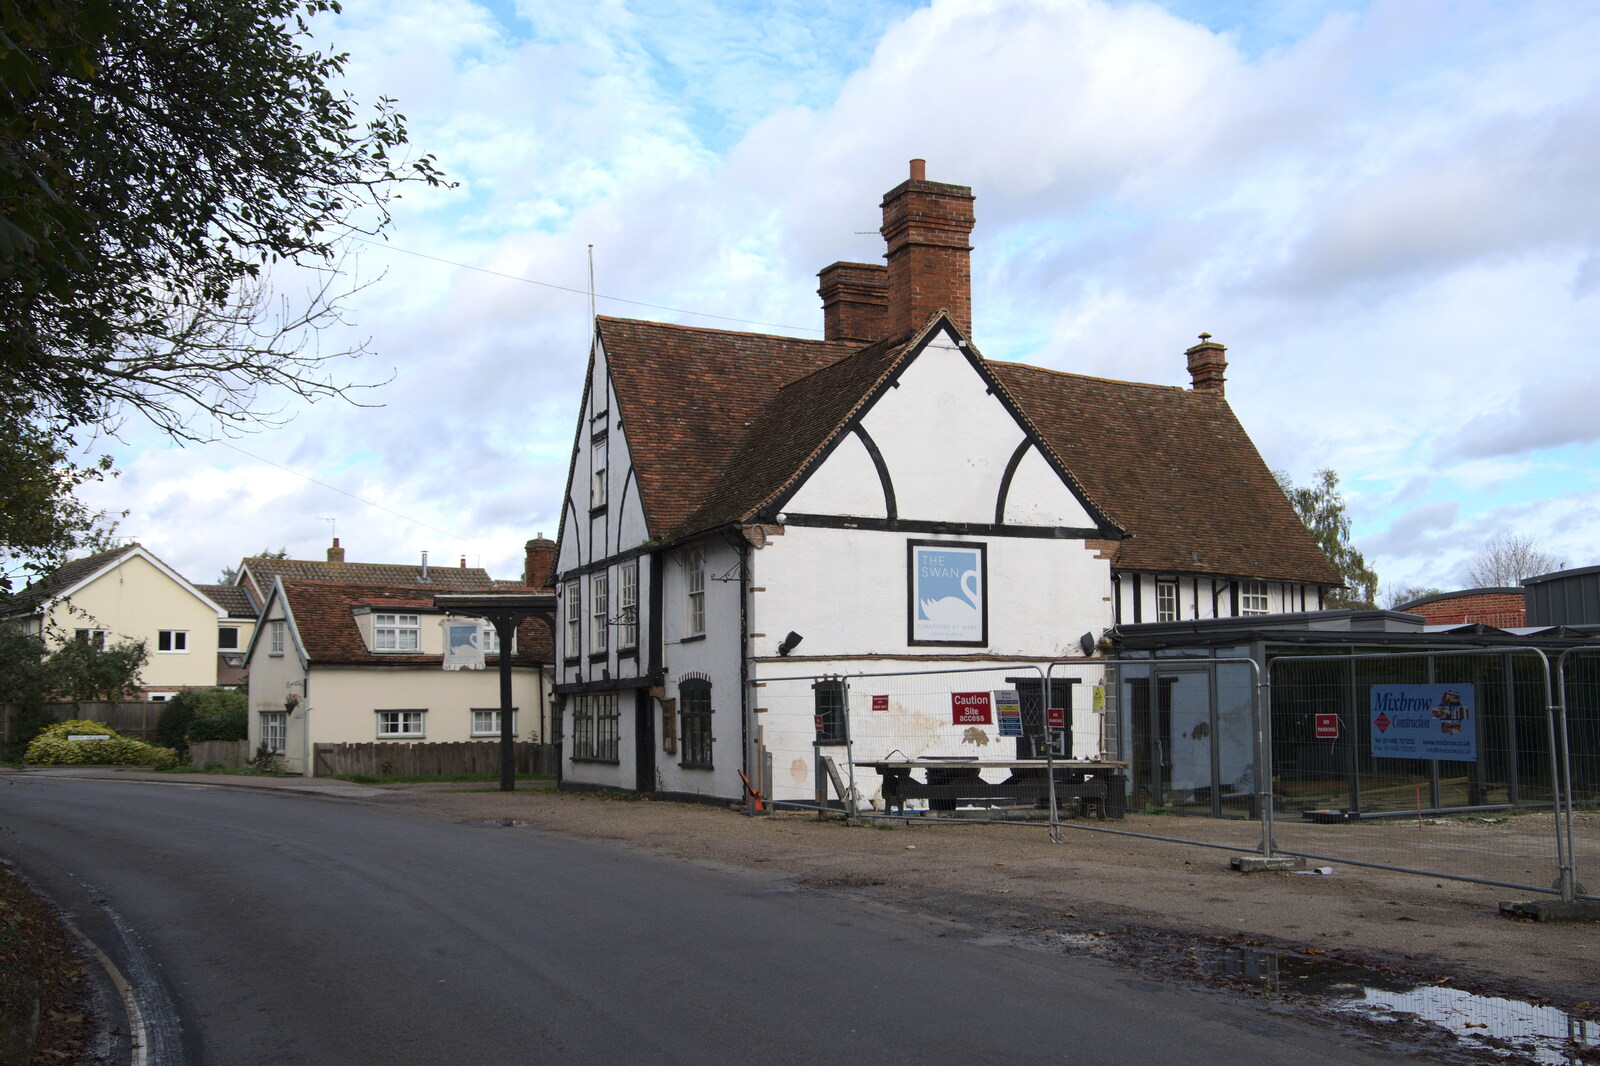 A Postcard from Flatford and Dedham, Suffolk and Essex, 9th November 2022: The closed-or-being-rebuilt The Swan